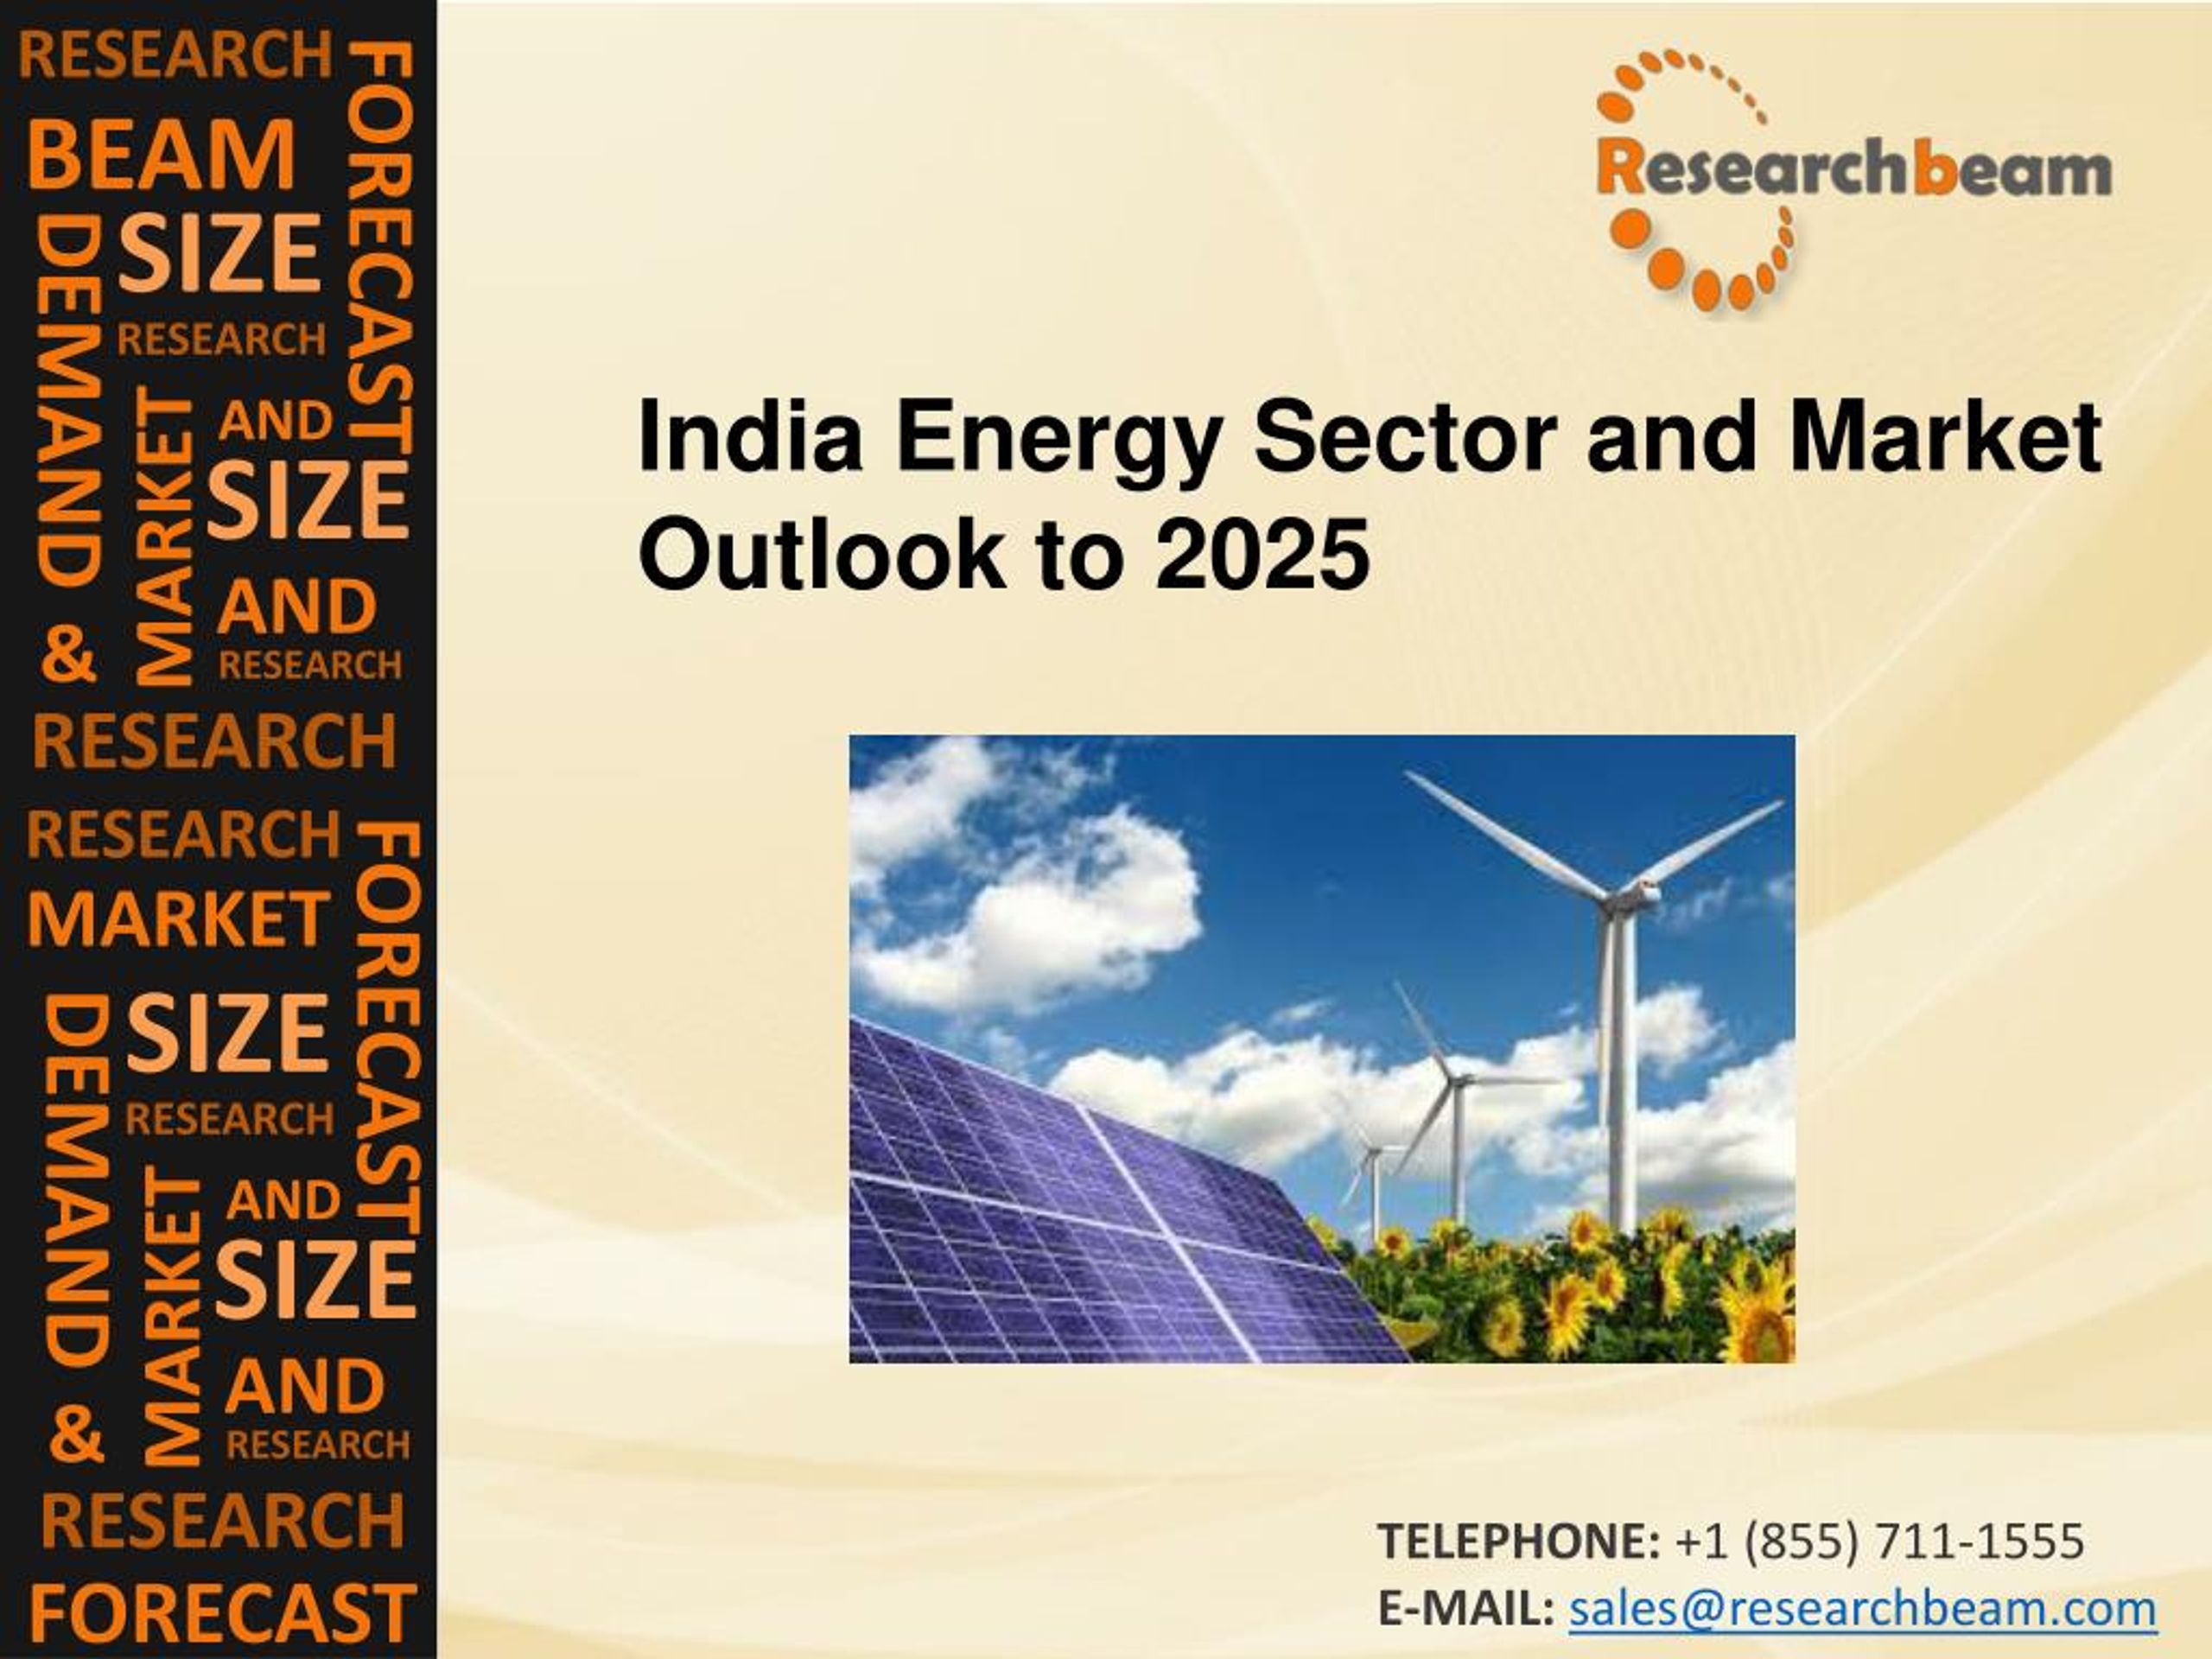 PPT India Energy Sector and Market Outlook to 2025 PowerPoint